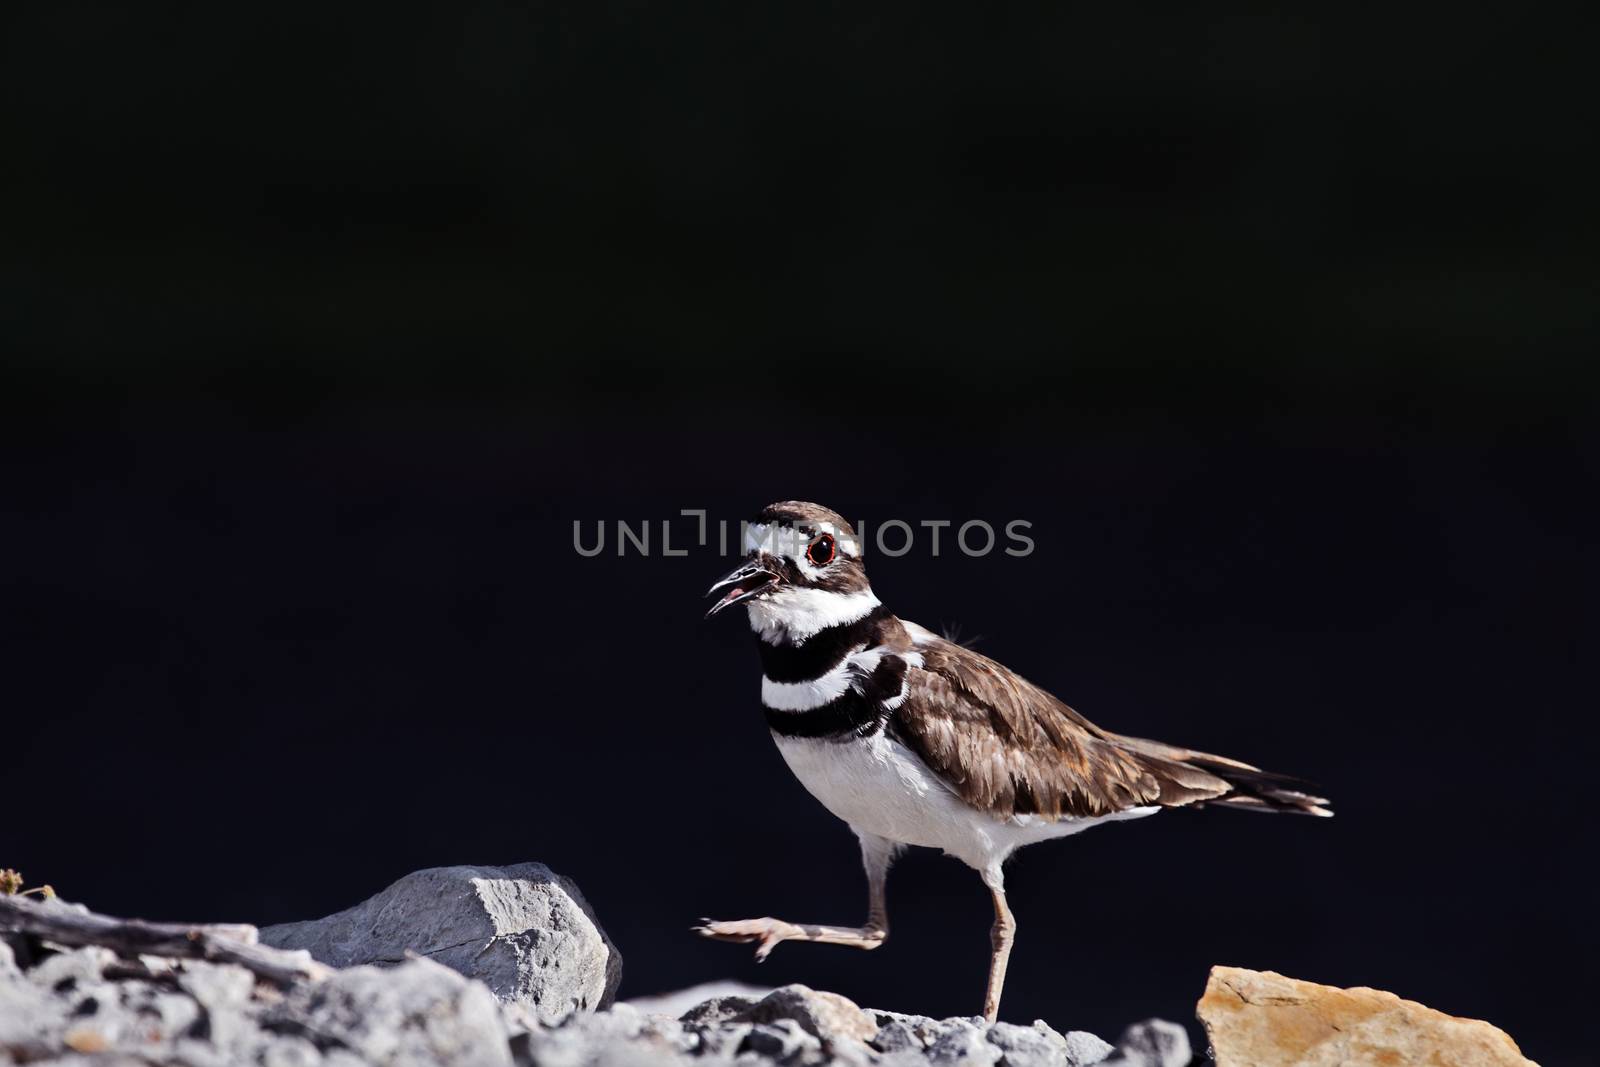 Killdeer guarding walking on rocks. Extreme shallow depth of field with selective focus on bird's eyes.